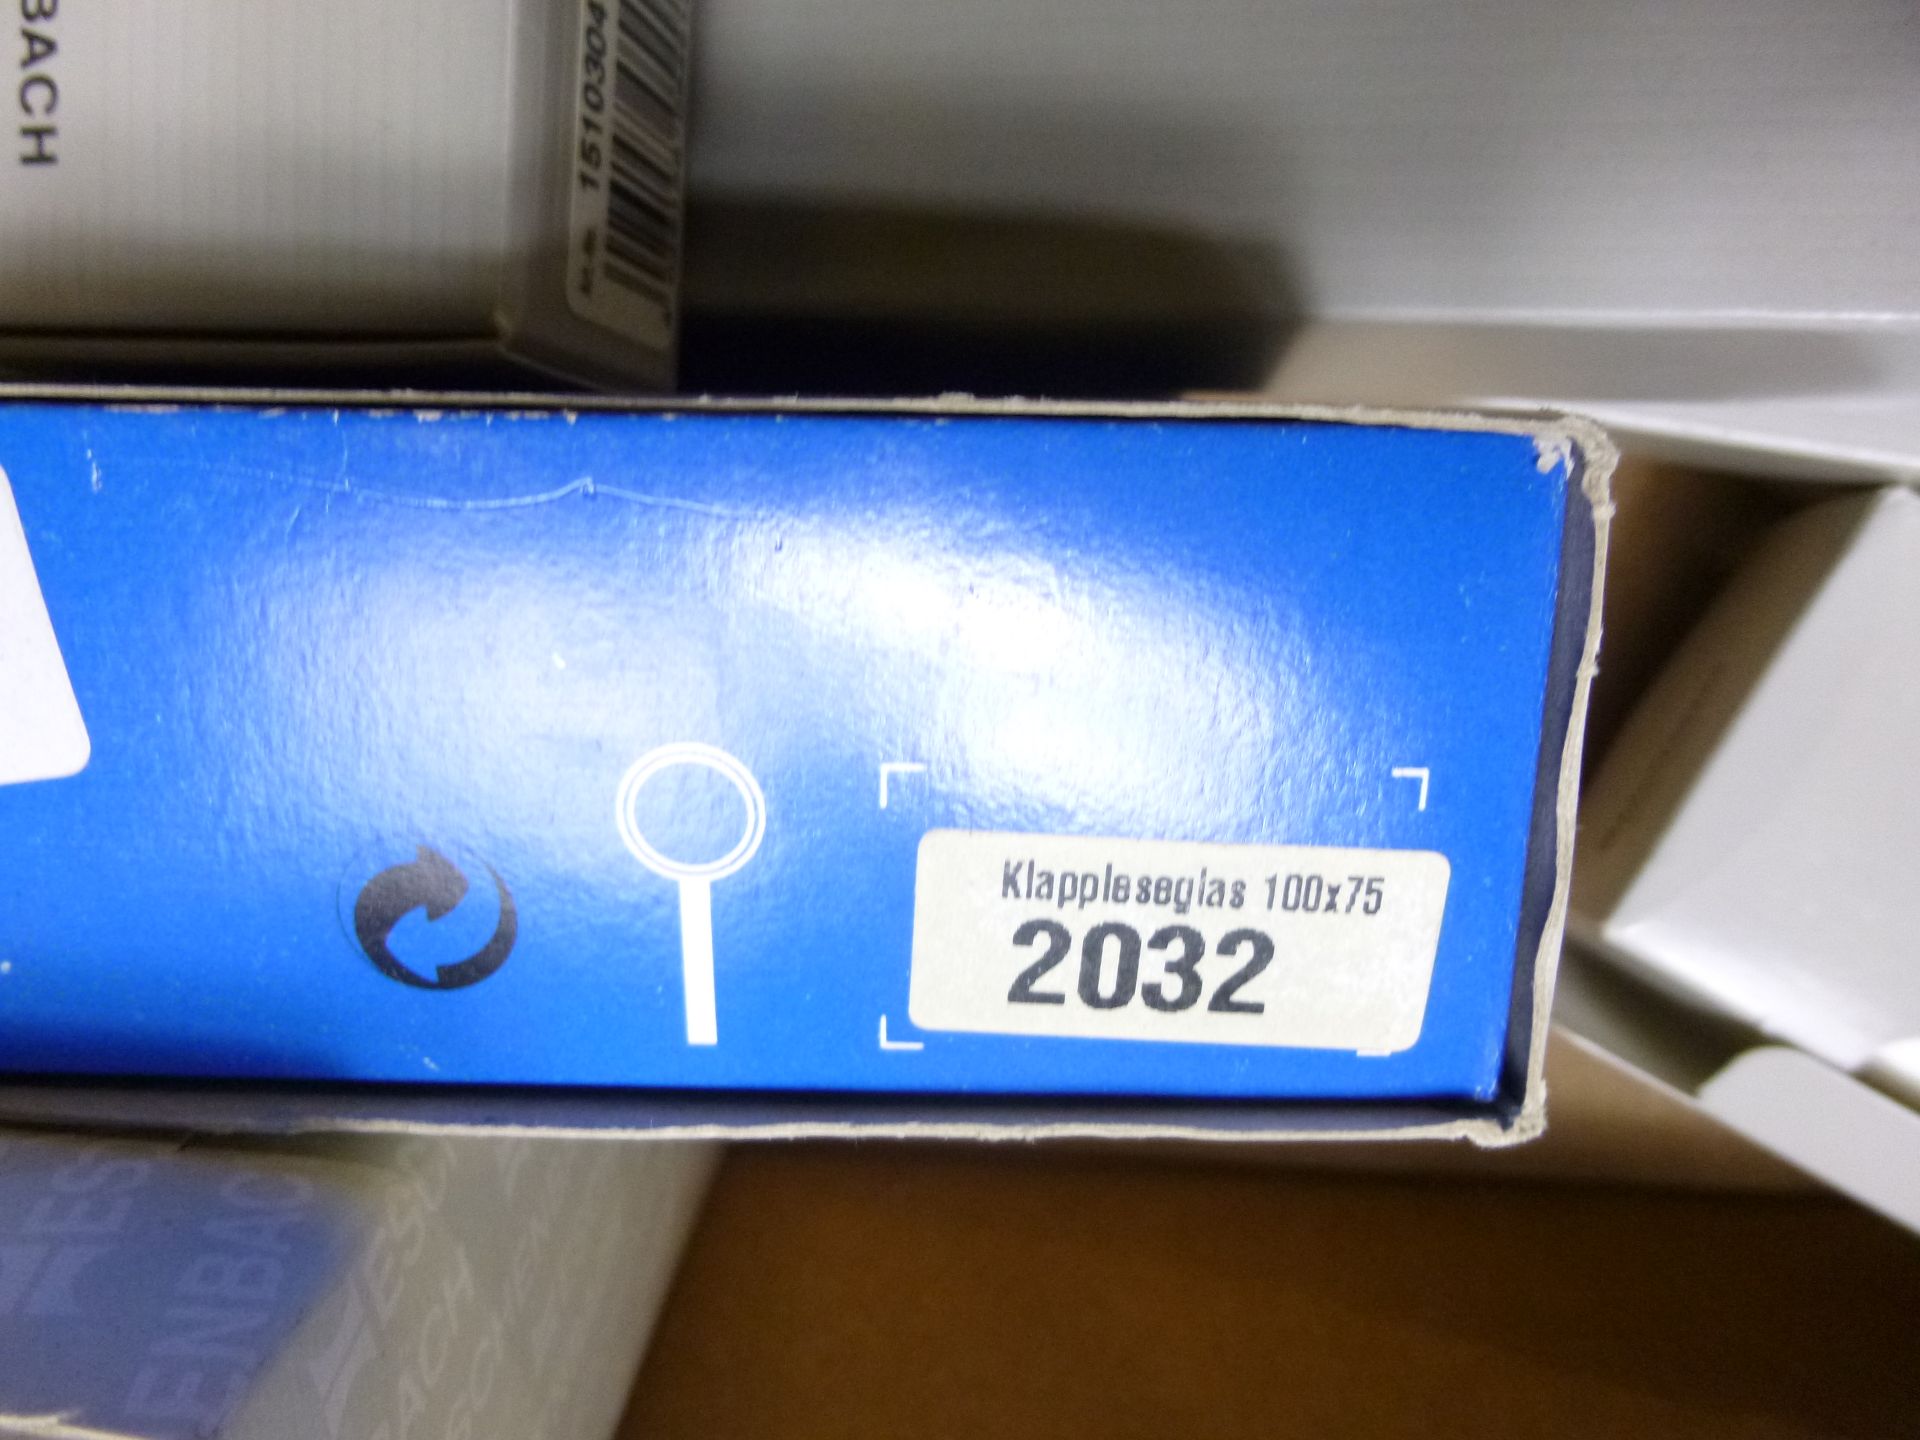 Lot of new Eschenbach optica loops magnifying glasses etc (new in boxes) Shipping can be prepared - Image 7 of 9